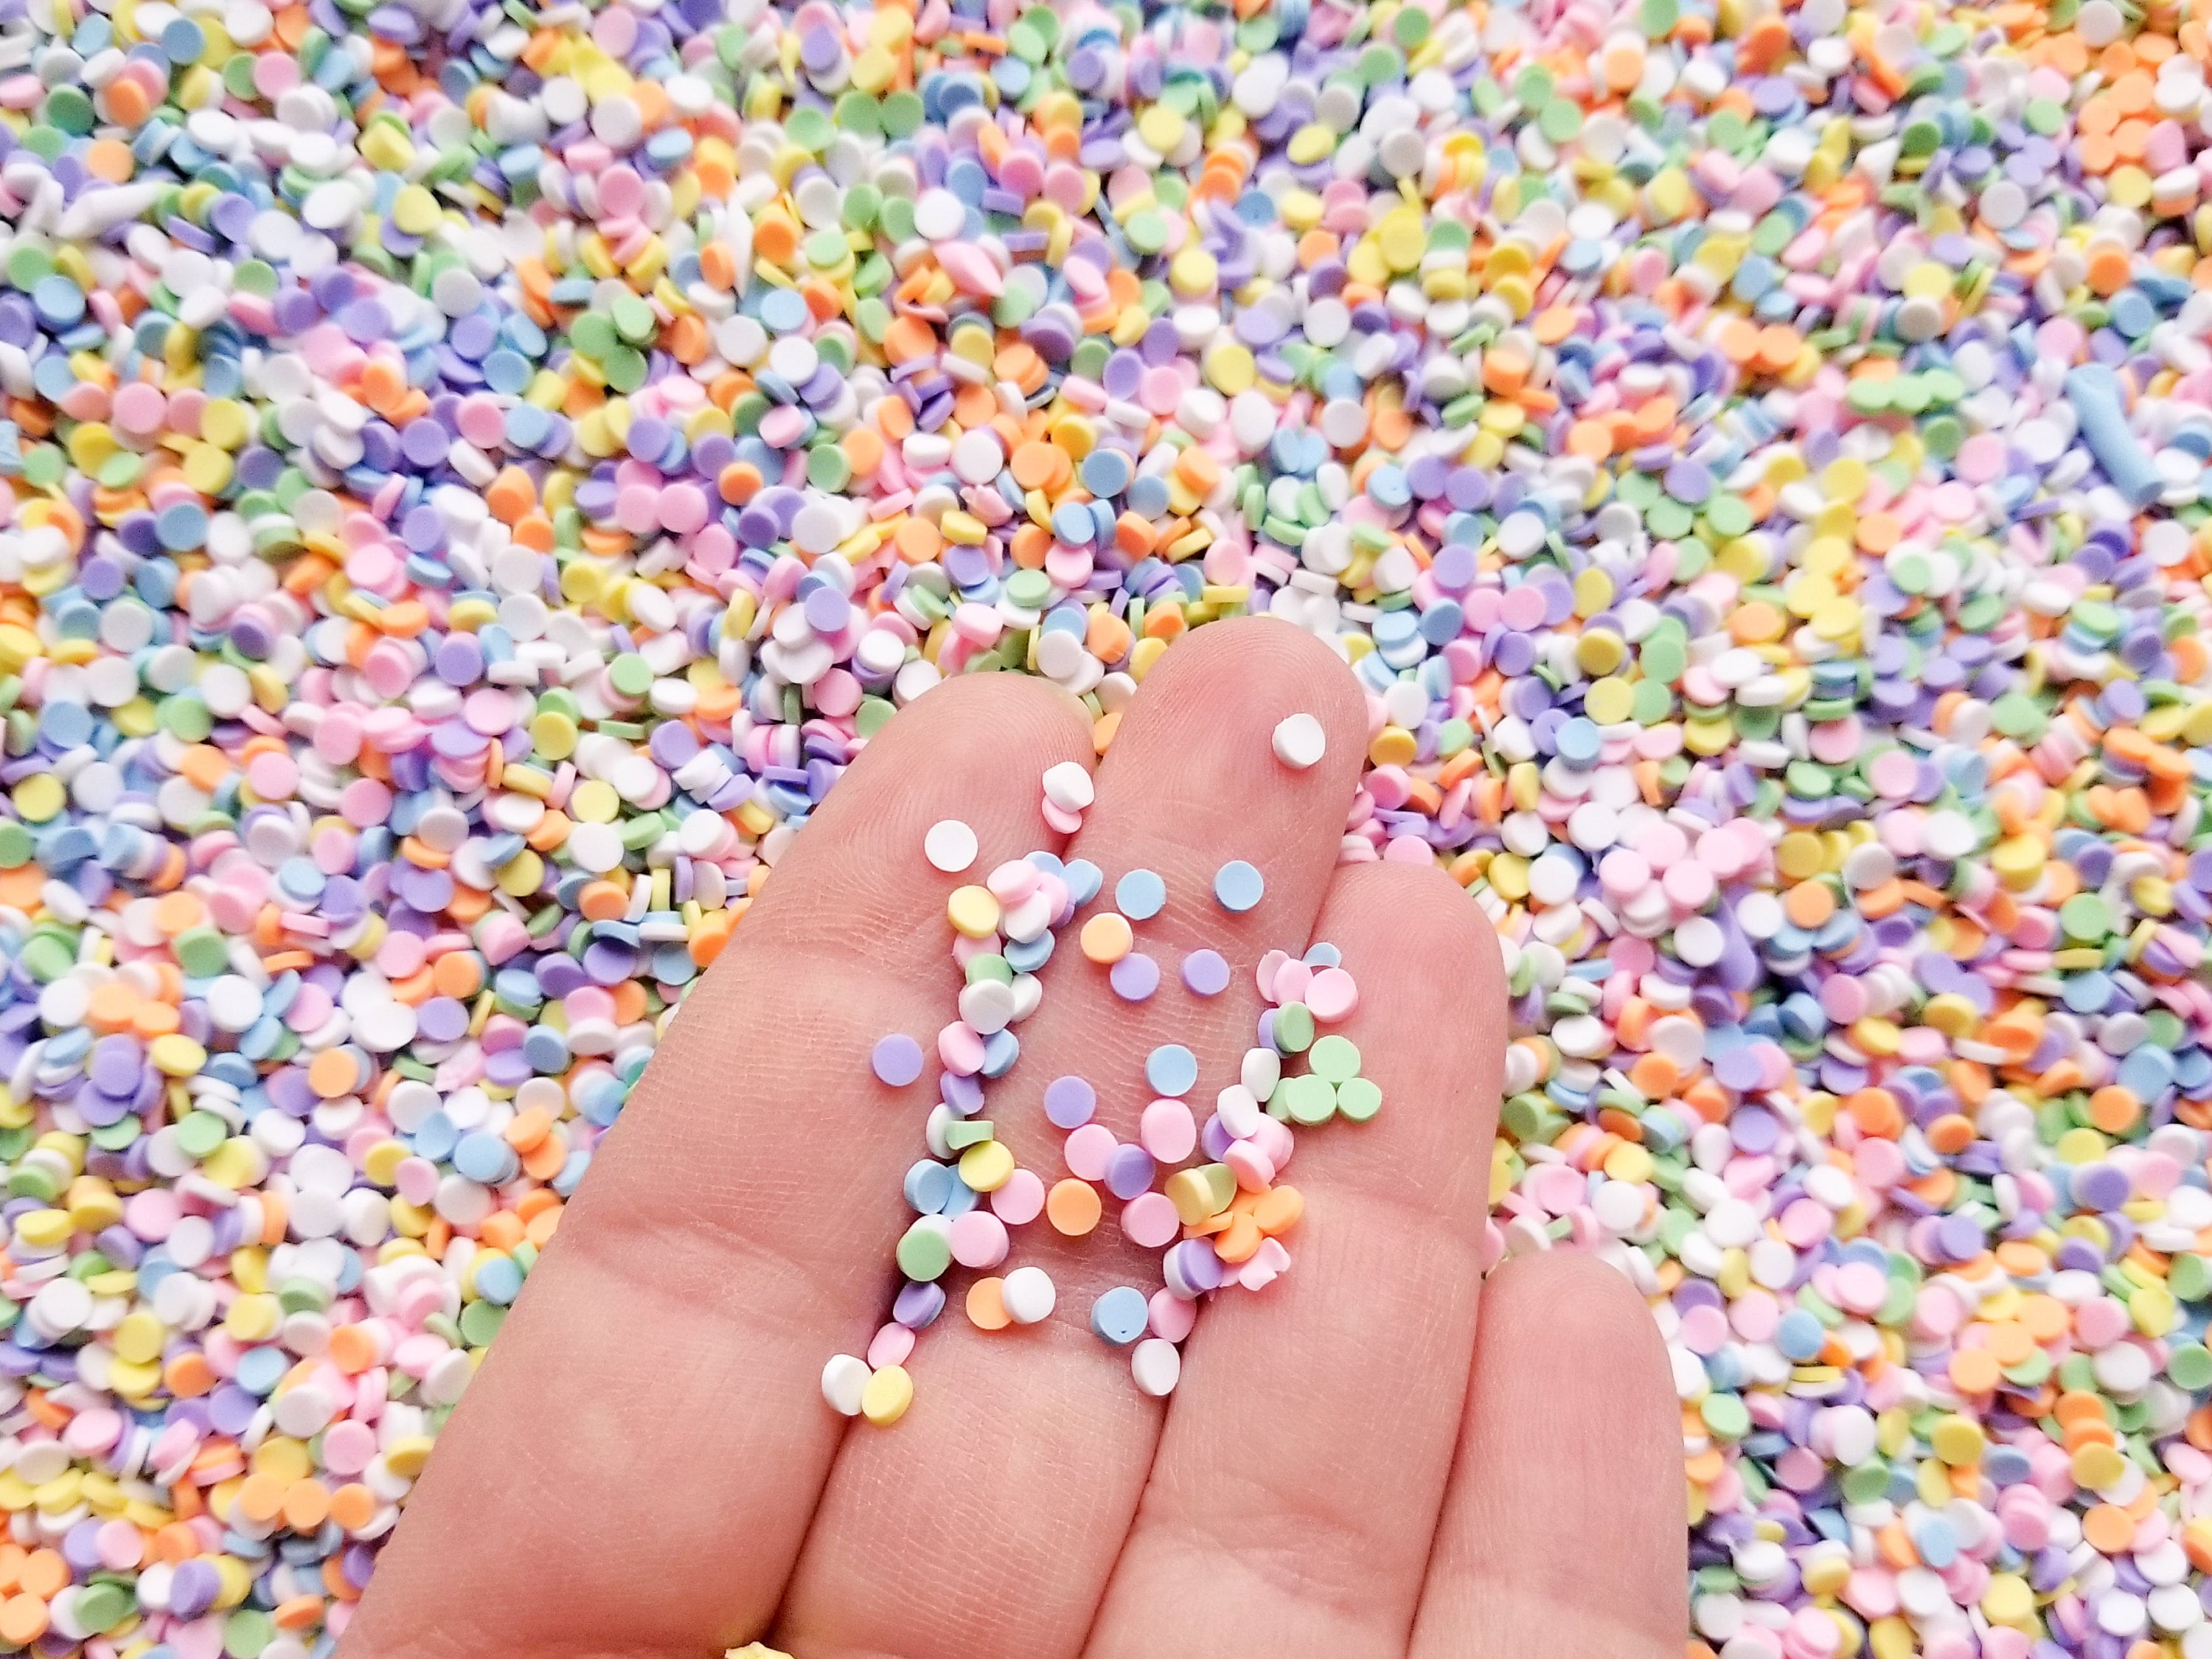 Colorful Fake Sprinkles Topping Beads (2mm) (5g)